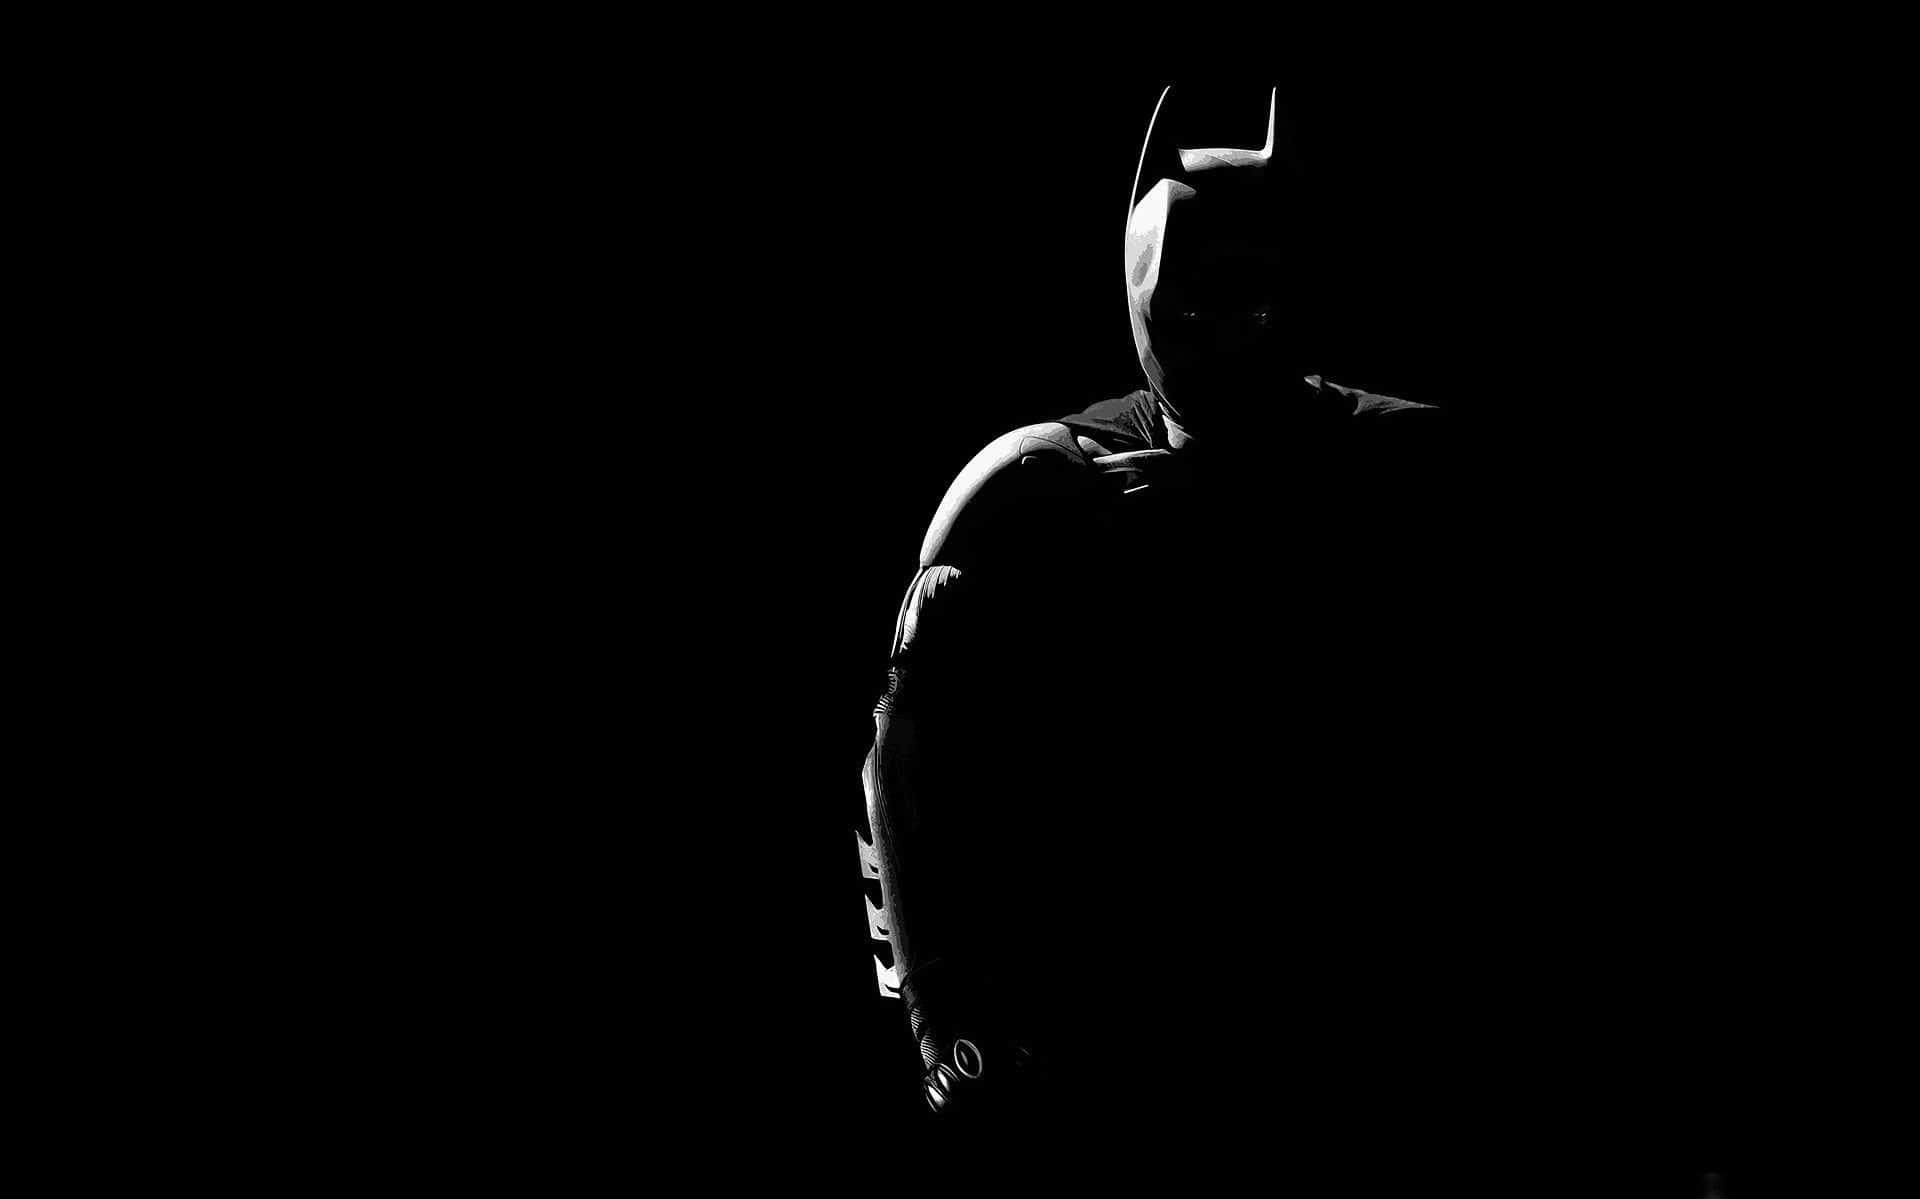 Batman In The Dark Silhouetted Against A Black Background